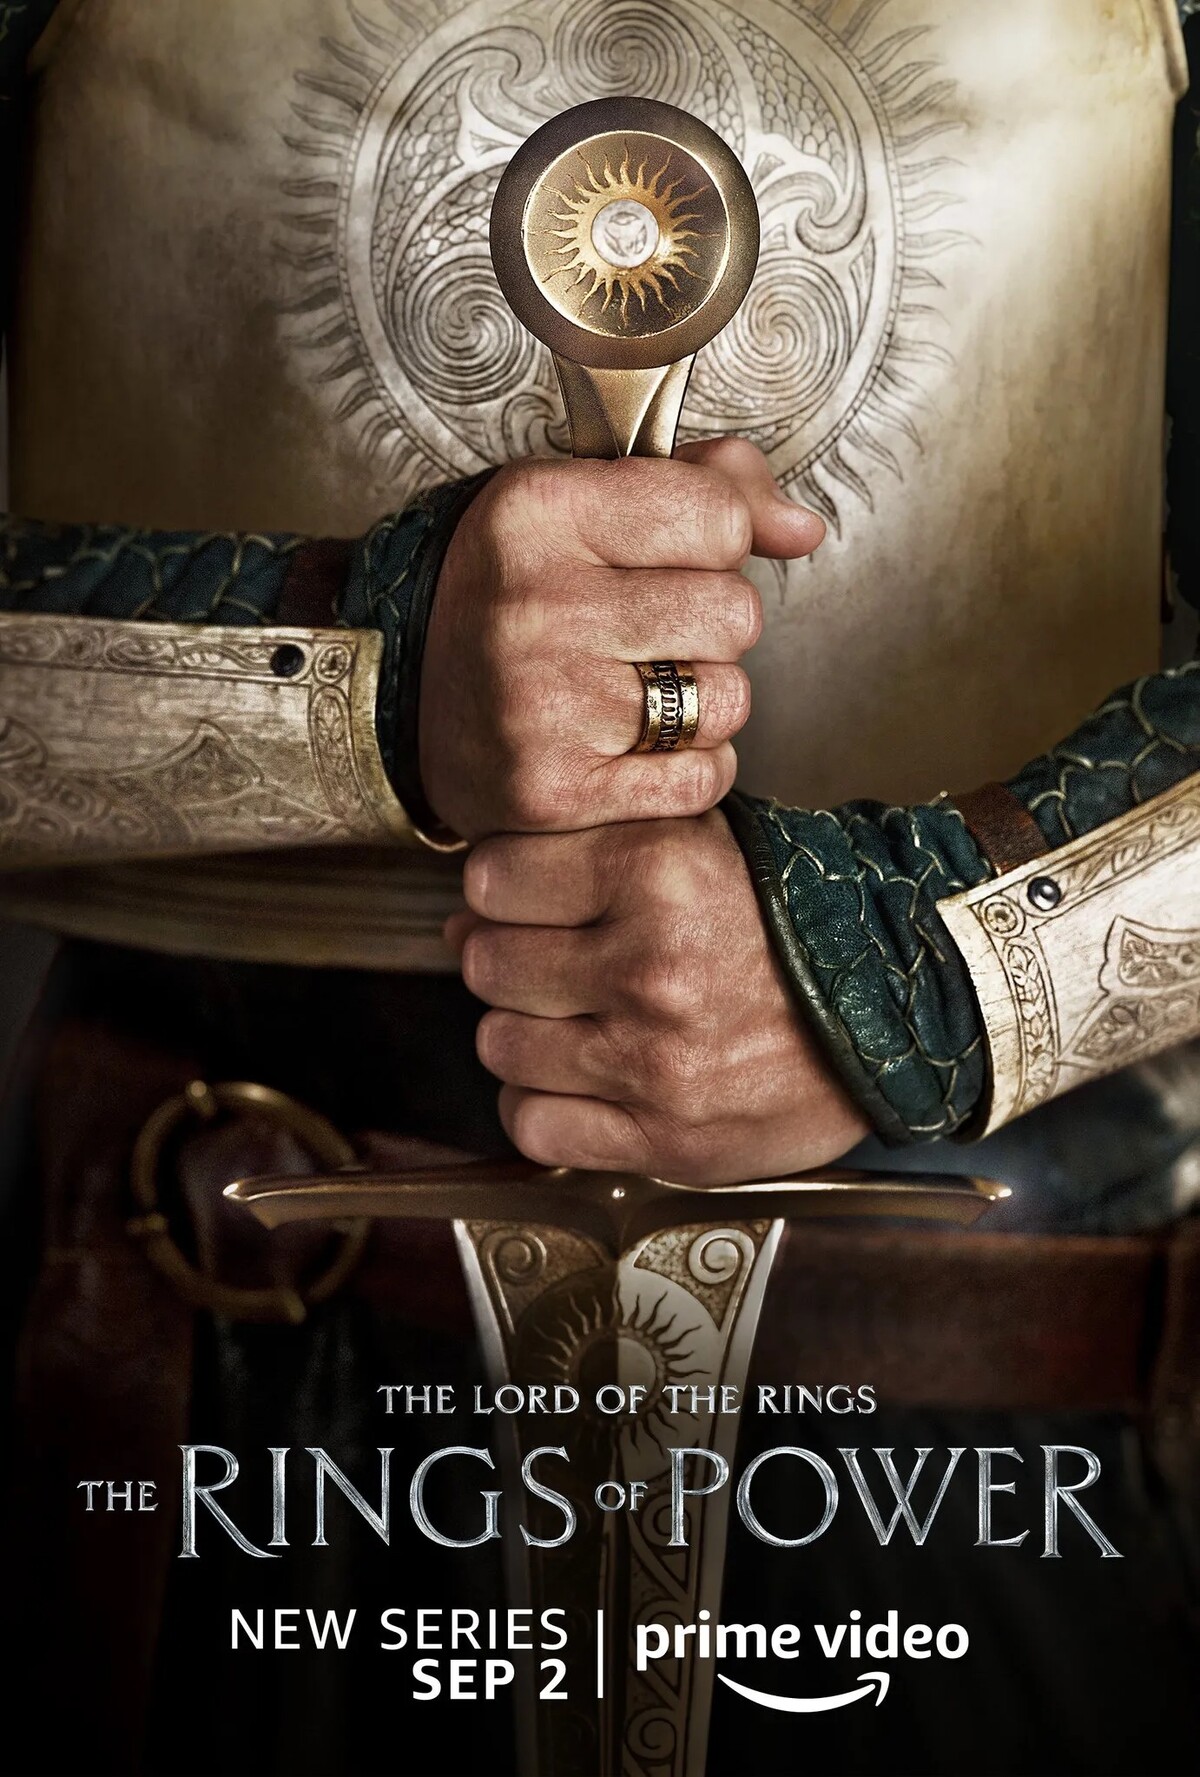 Pán Prsteňov
The Lord of the Rings: The Rings of Power